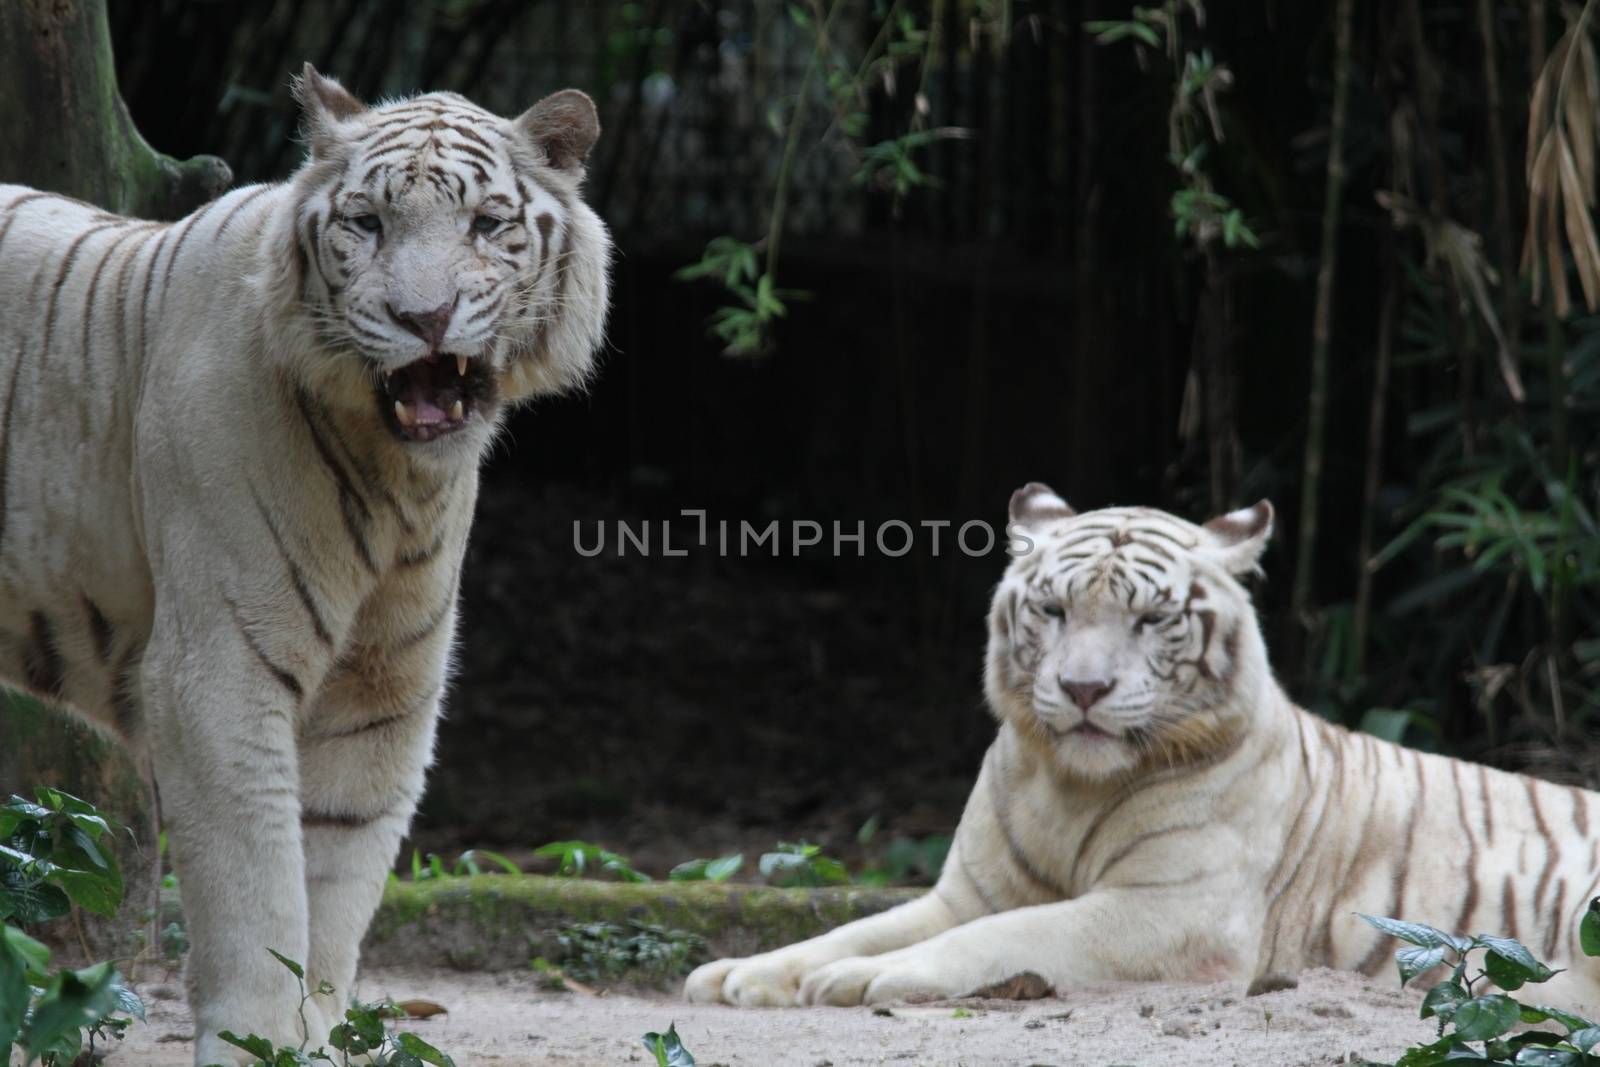 White Tiger by Kitch